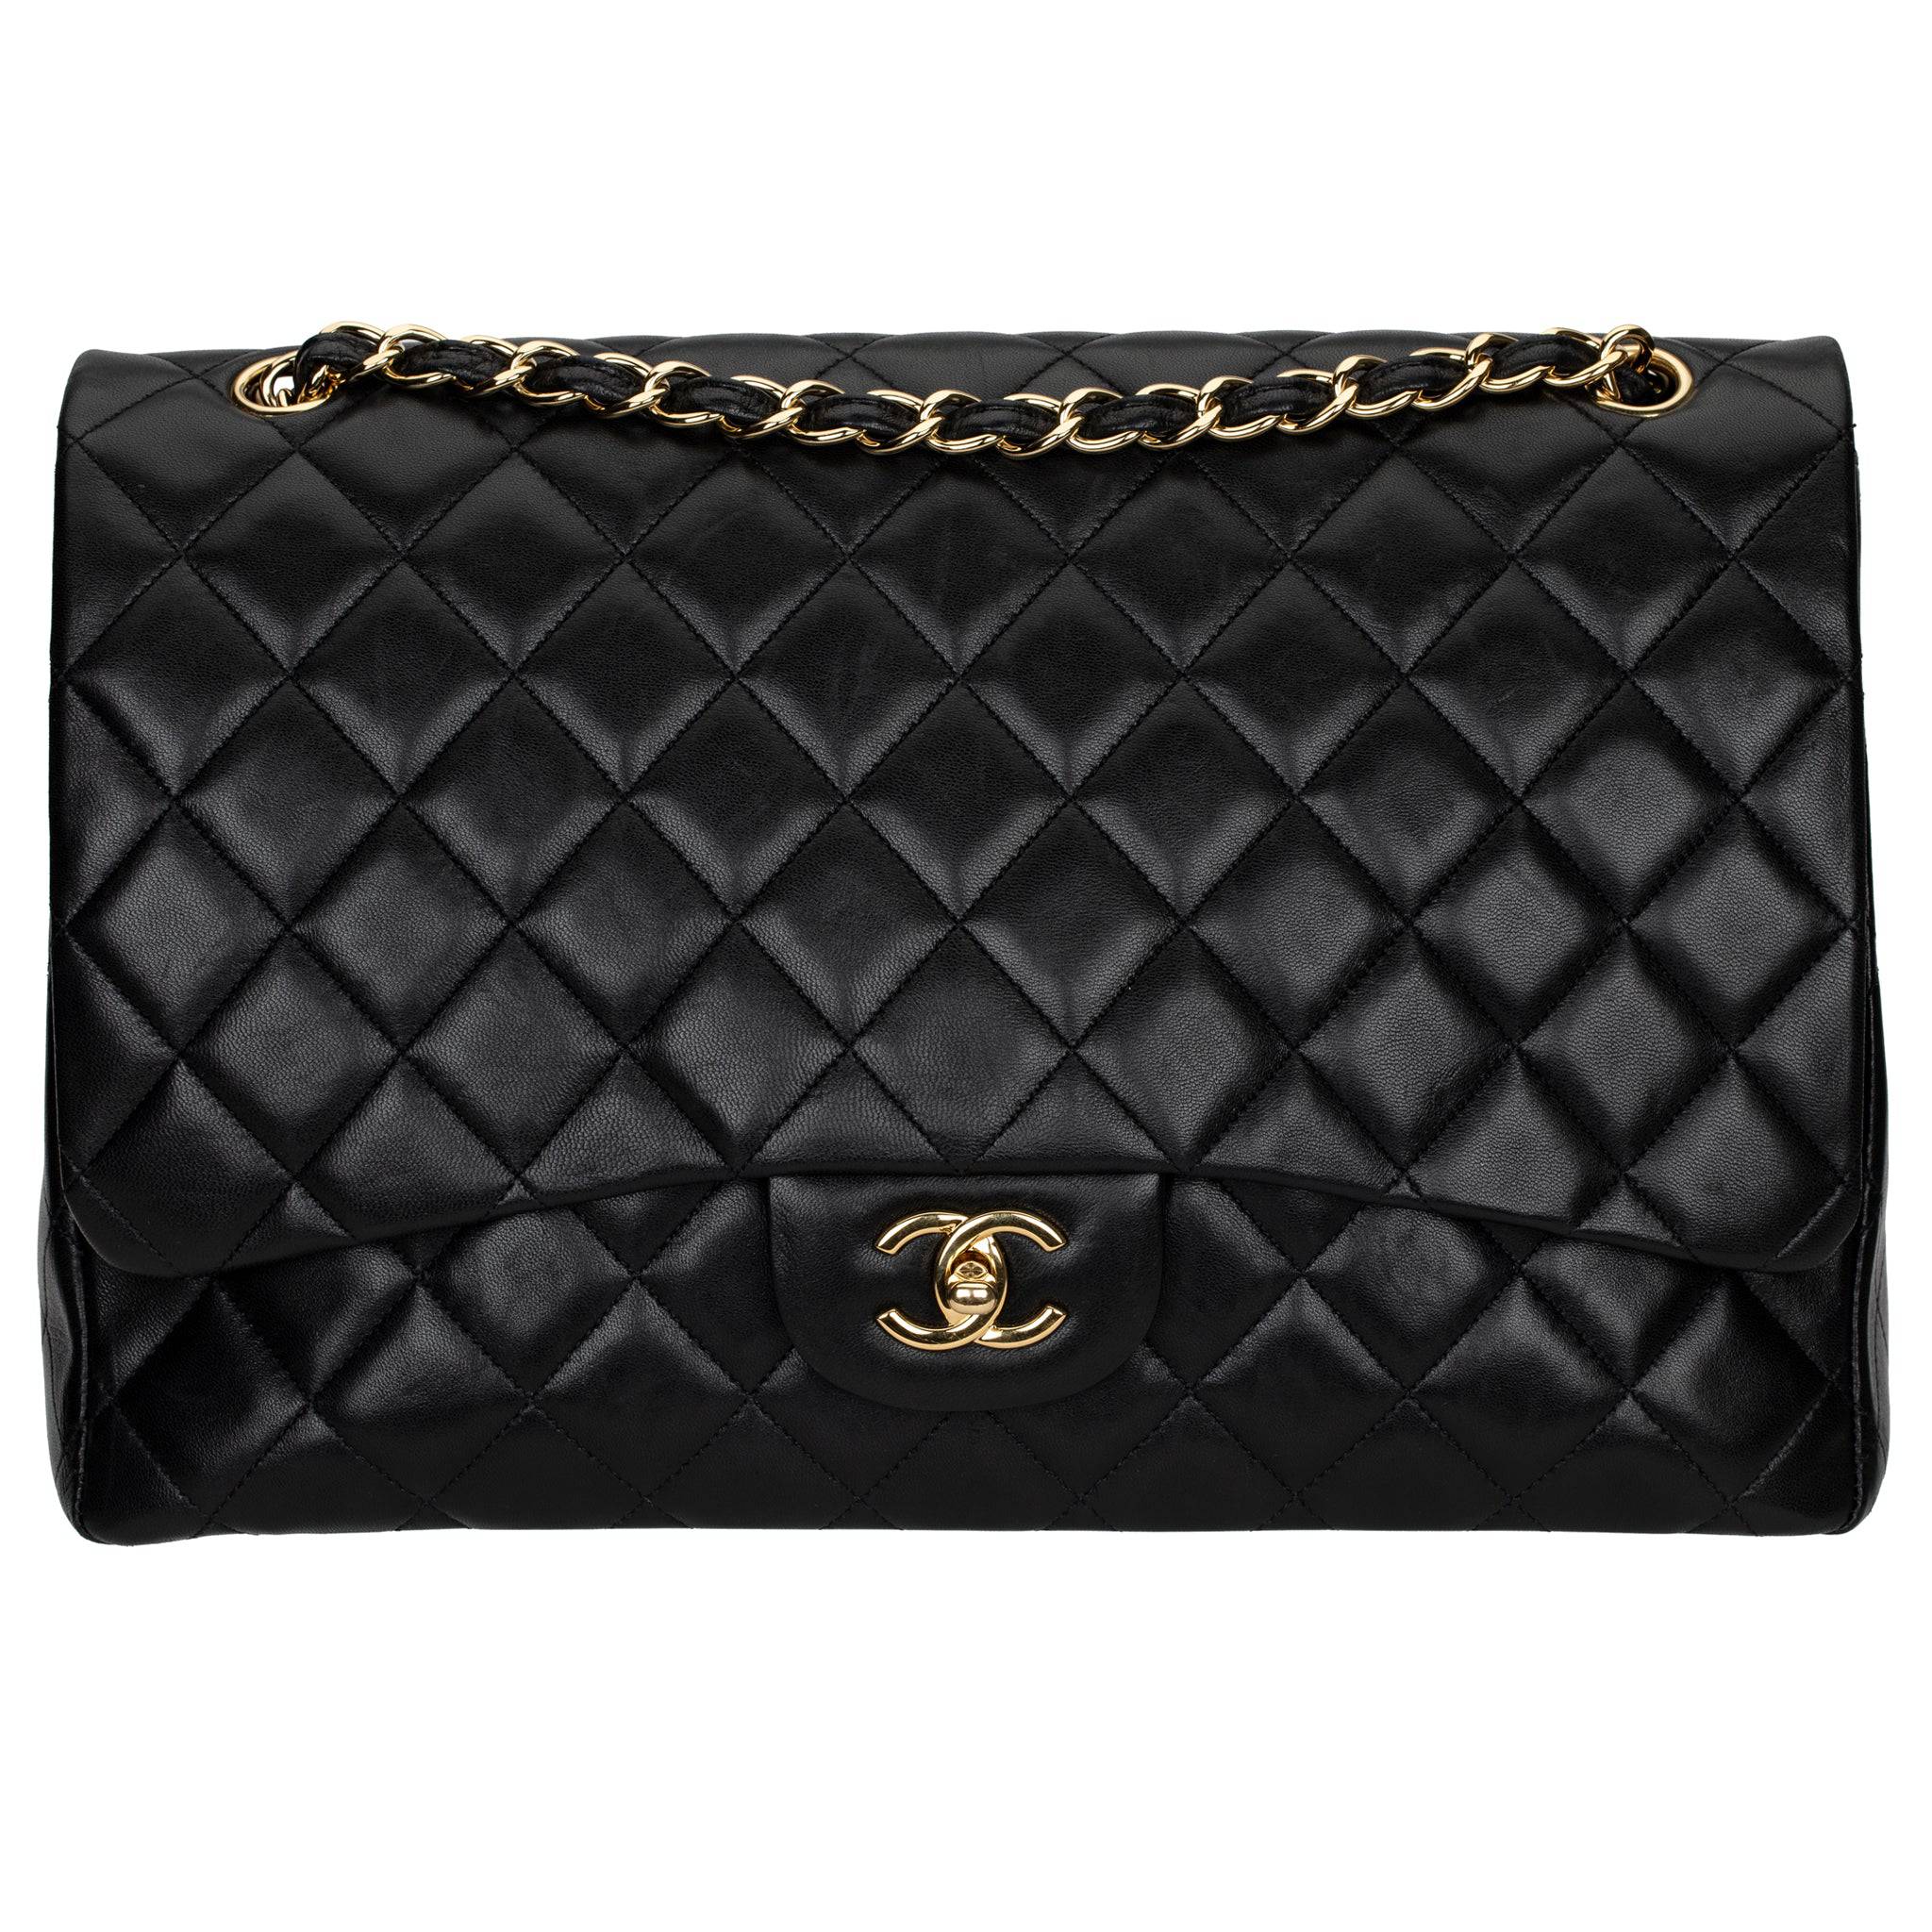 CHANEL MAXI CLASSIC FLAP BLACK QUILTED LAMBSKIN LEATHER GOLD-TONE HARDWARE - On Repeat